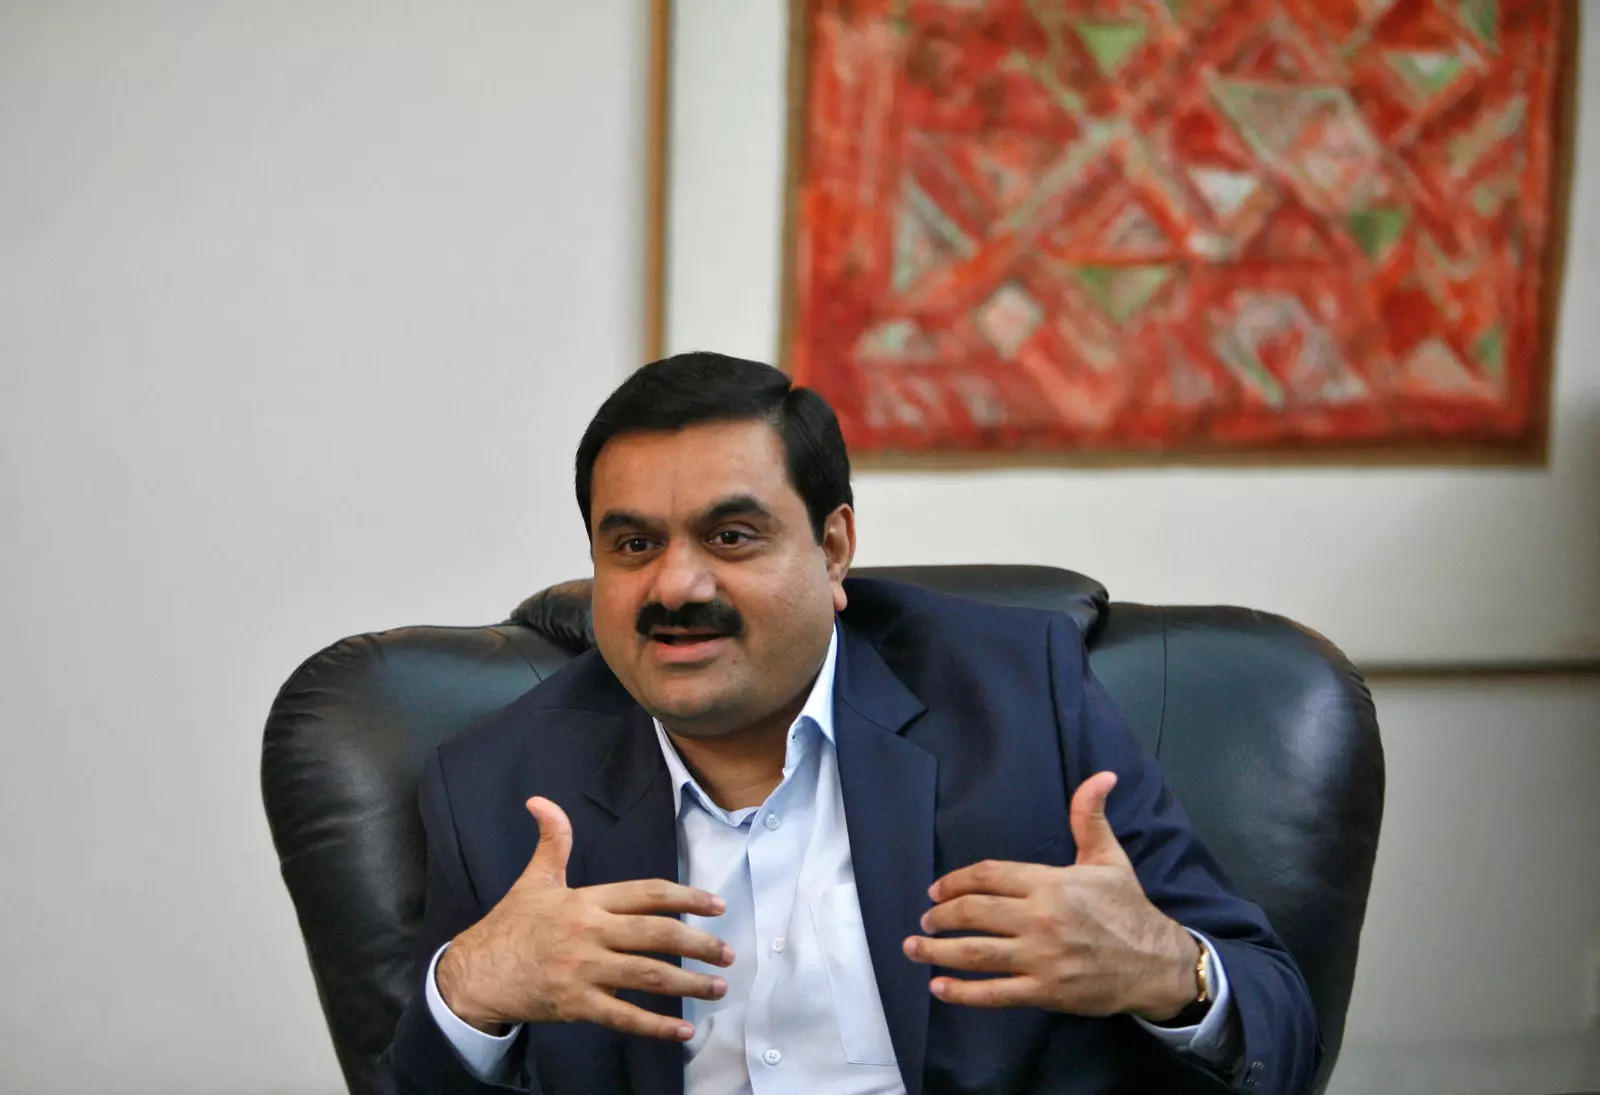 Adani group welcomed the order of the Supreme Court, Gautam Adani said – Truth will win